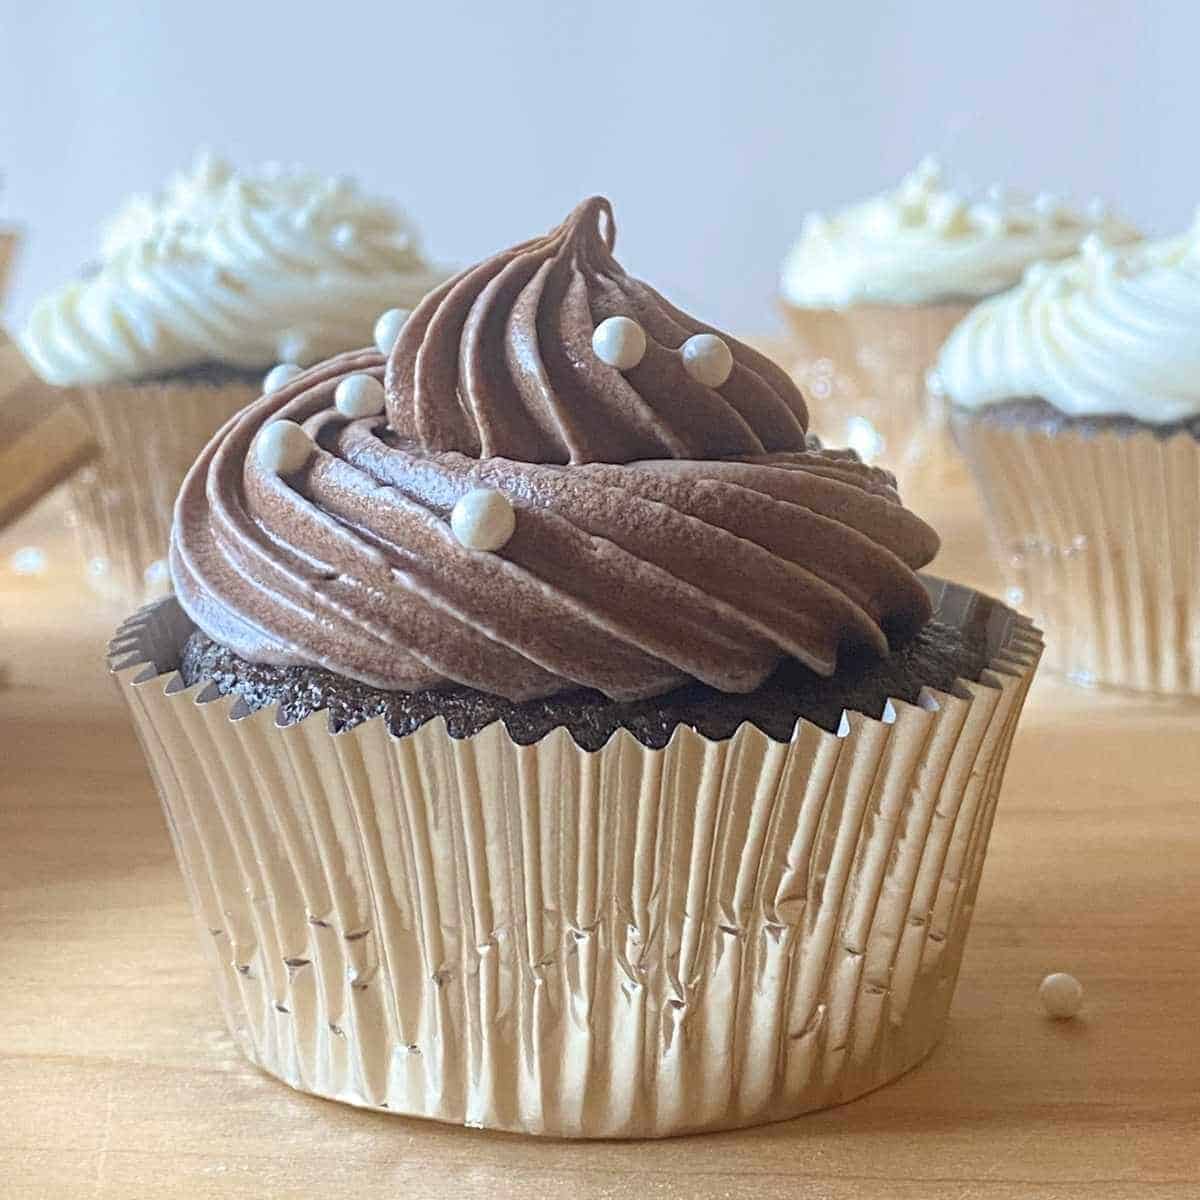 A chocolate gluten free cupcake with chocolate frosting. 